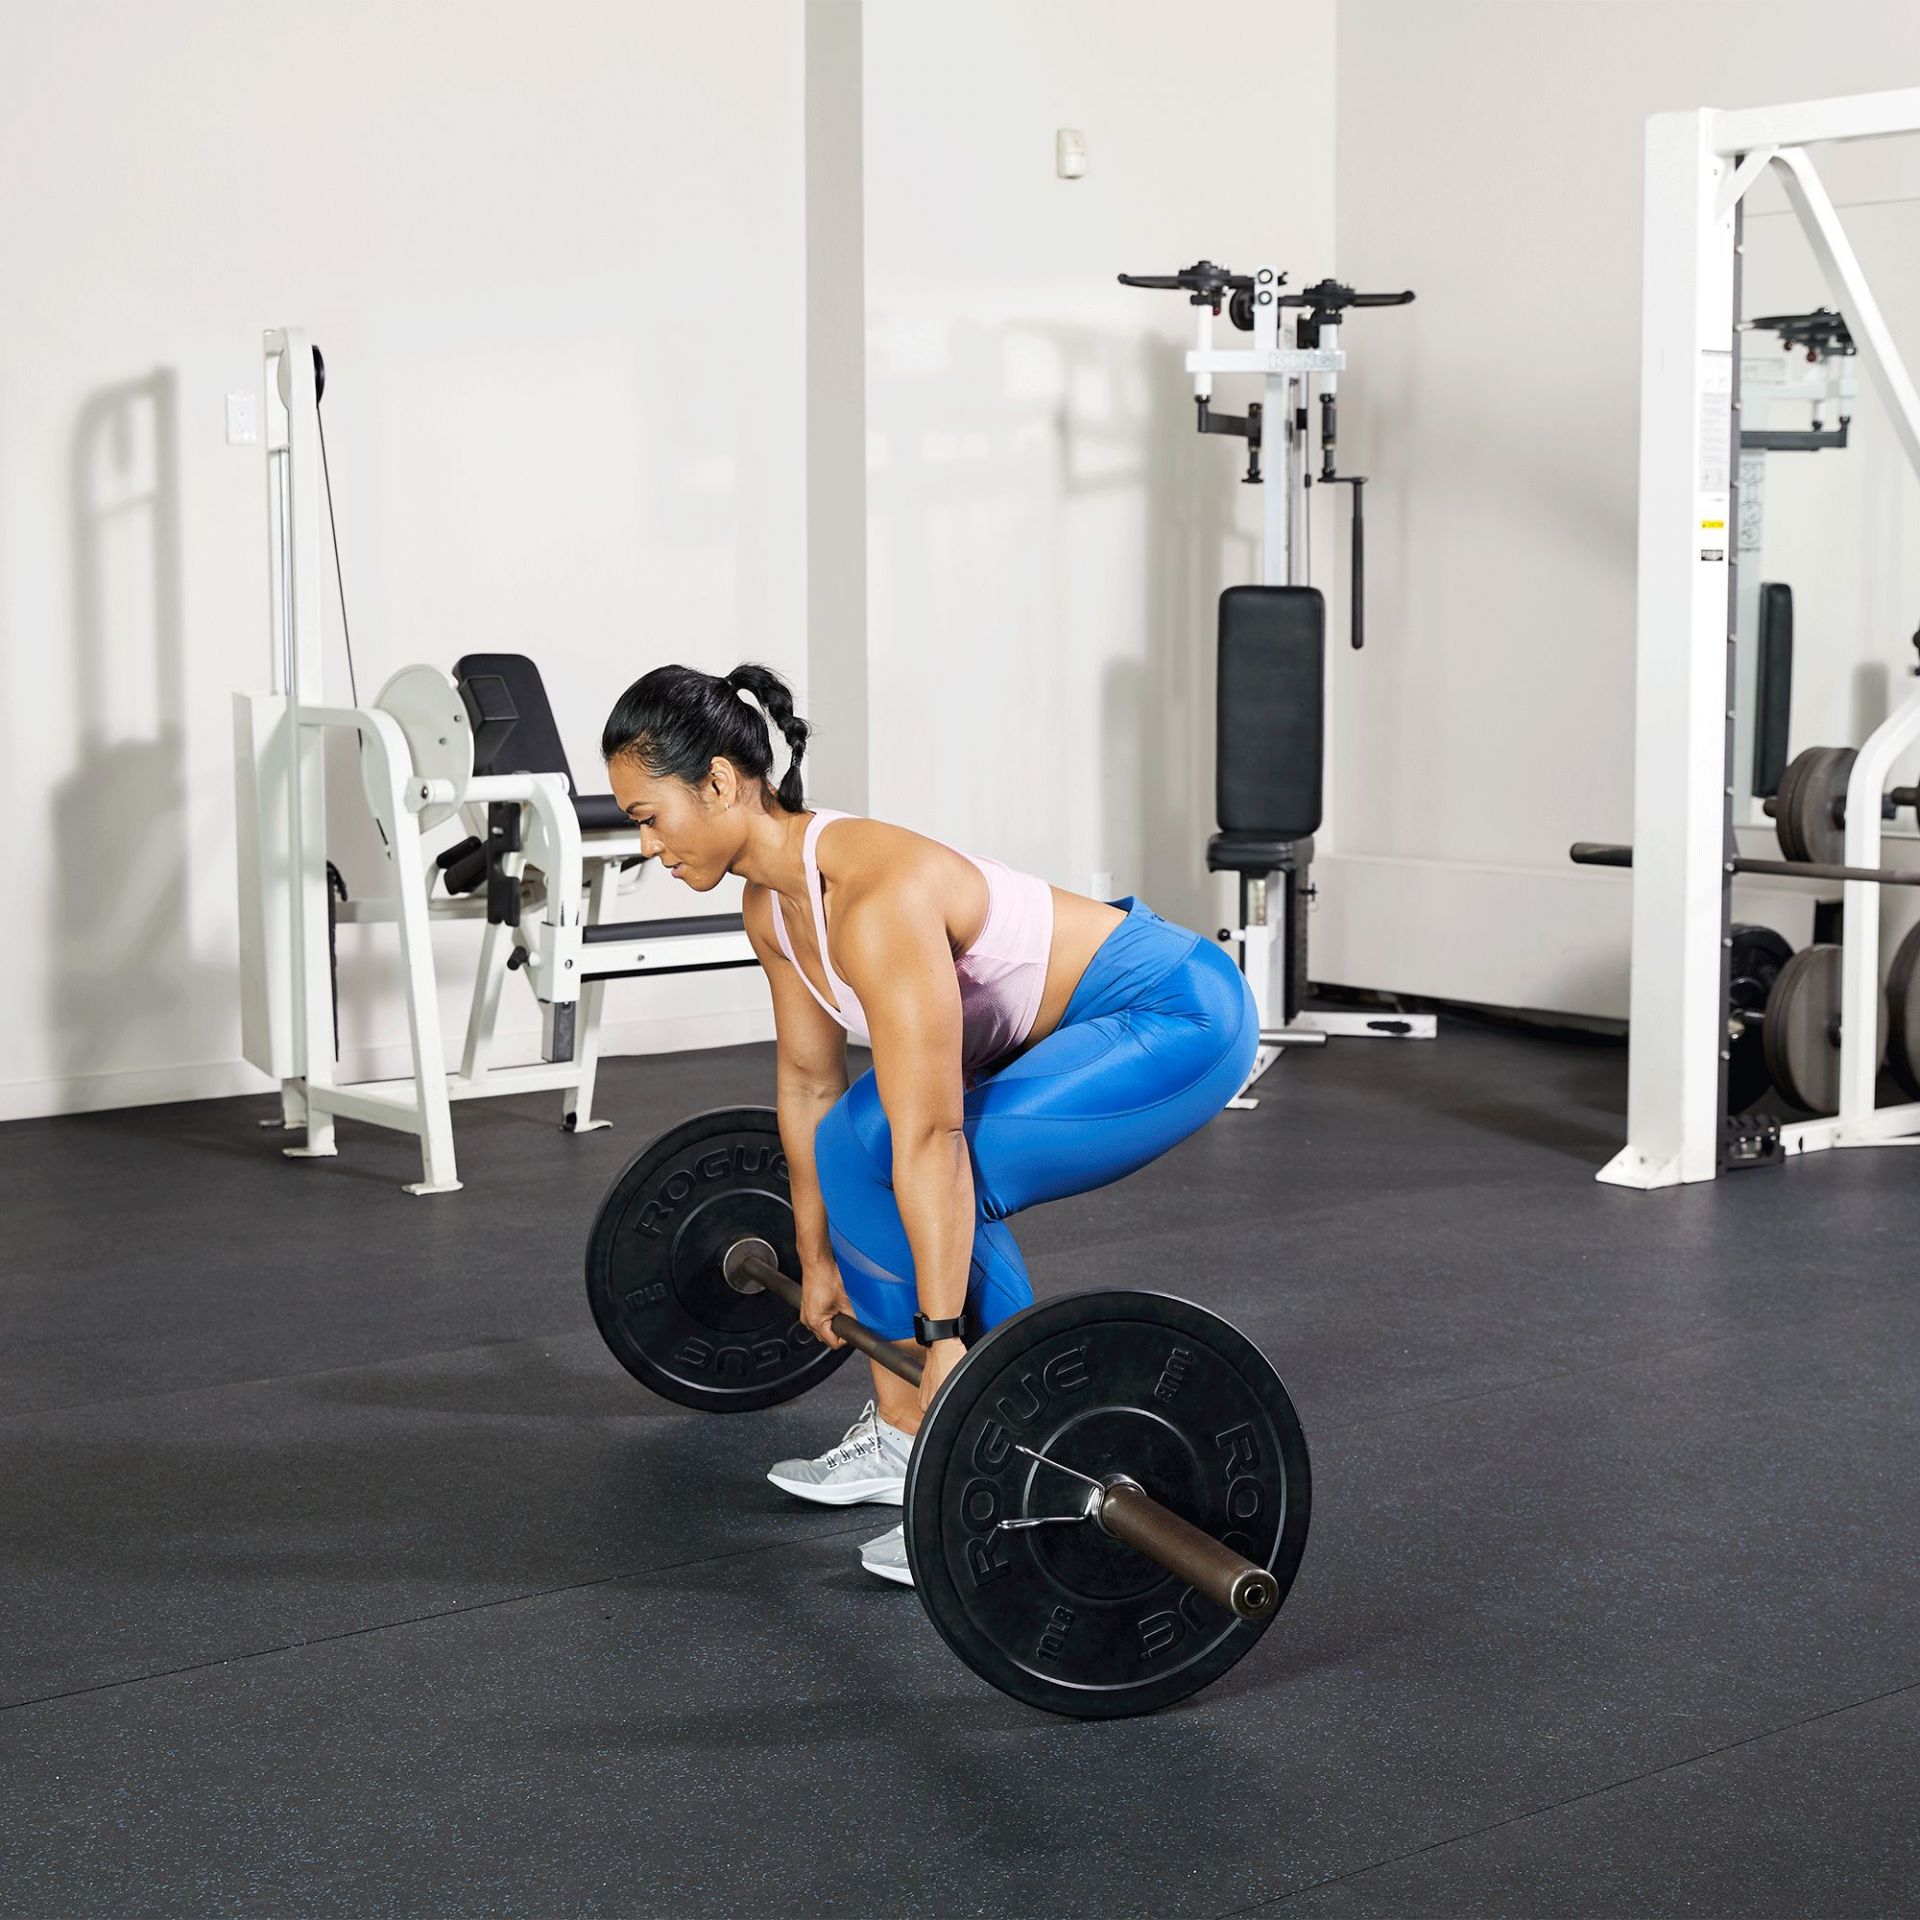 The Conventional Deadlift in Push Pull Leg routine